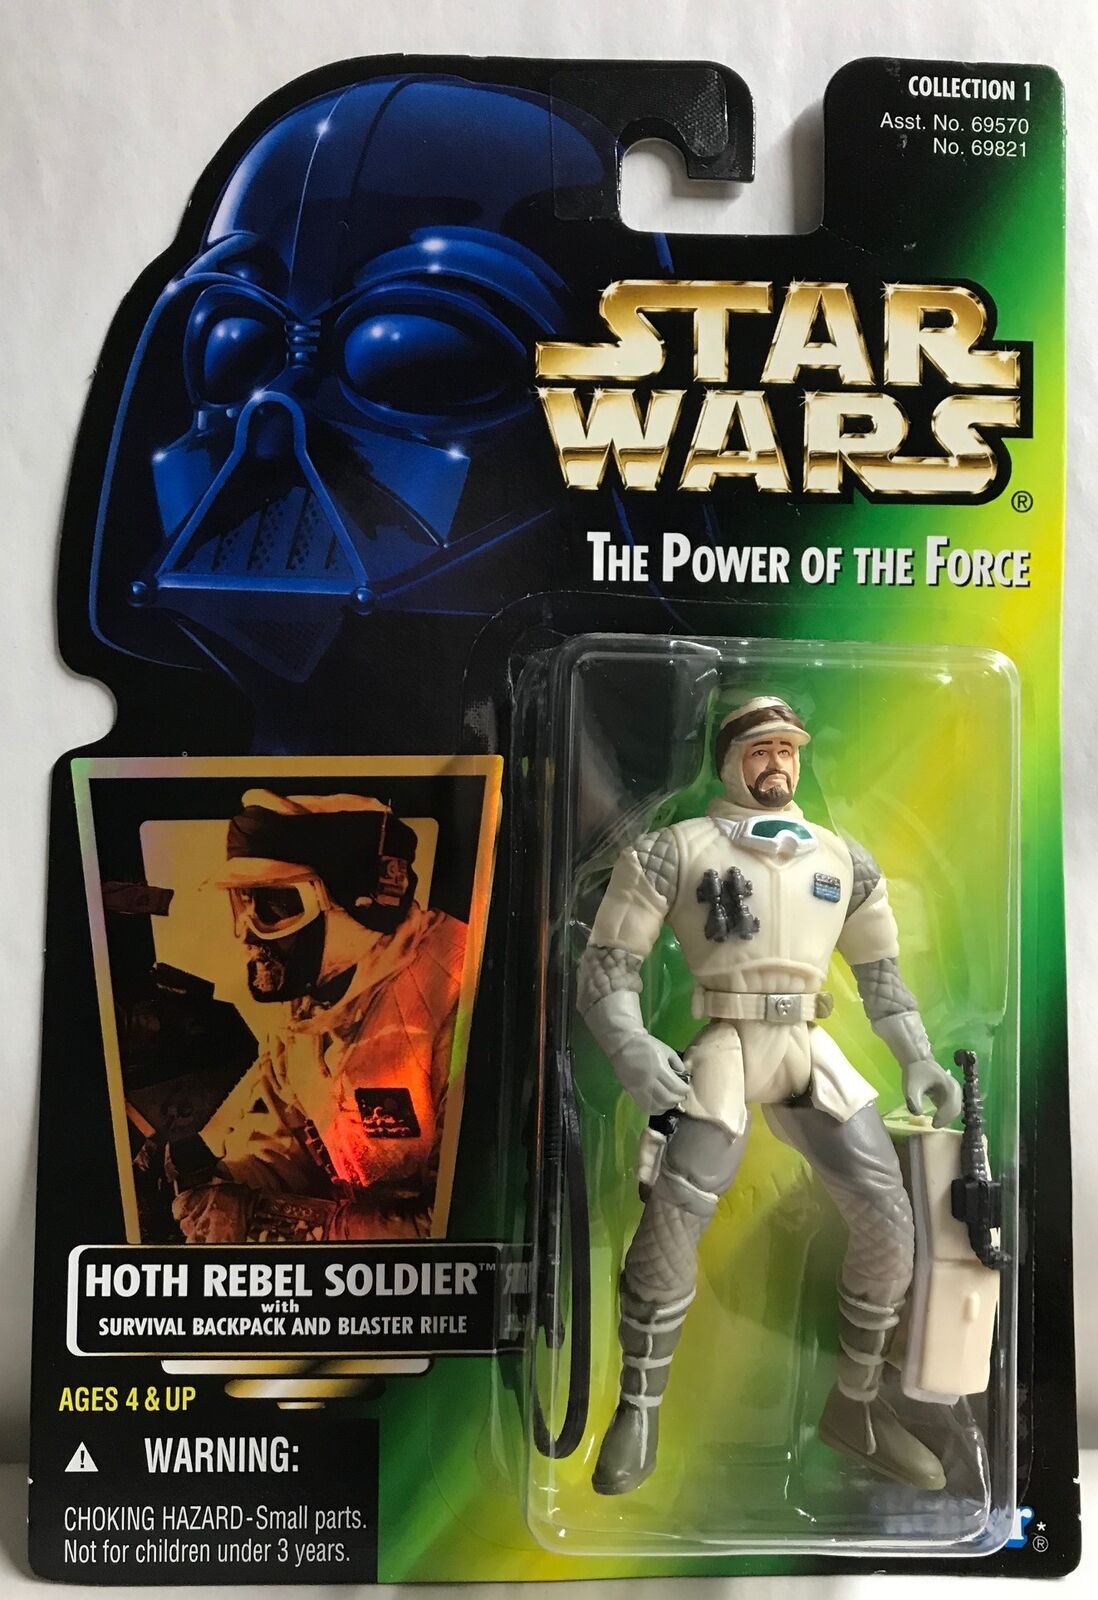 STAR WARS - KENNER - POTF - HOTH REBEL SOLDIER - with Survival Backpack and Backpack